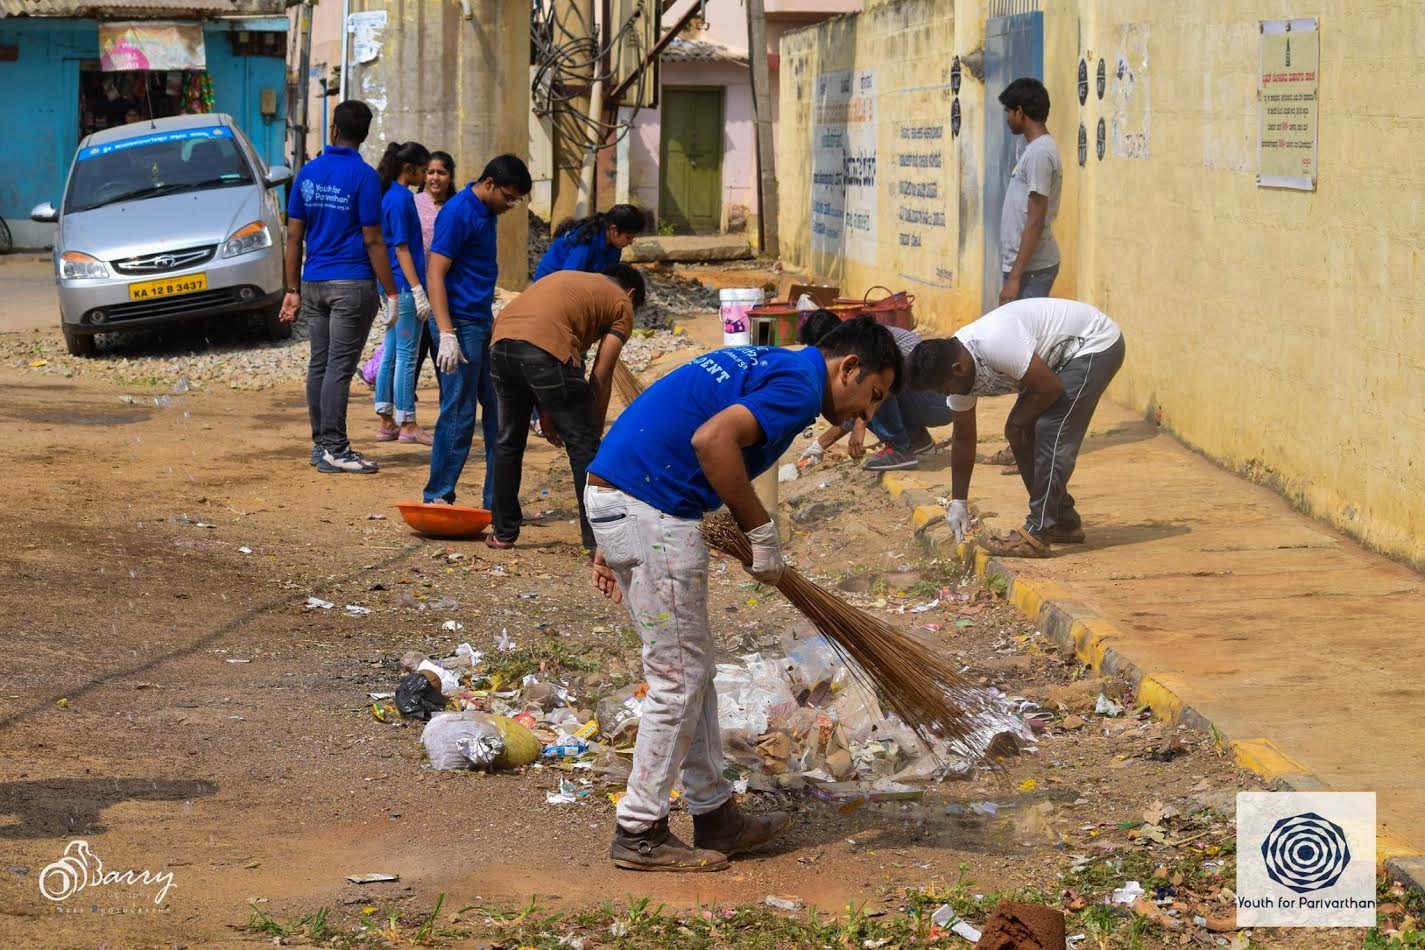 23-Yr-Old Amith Amarnath Dreams Of Making Bengaluru The Cleanest City In The Country